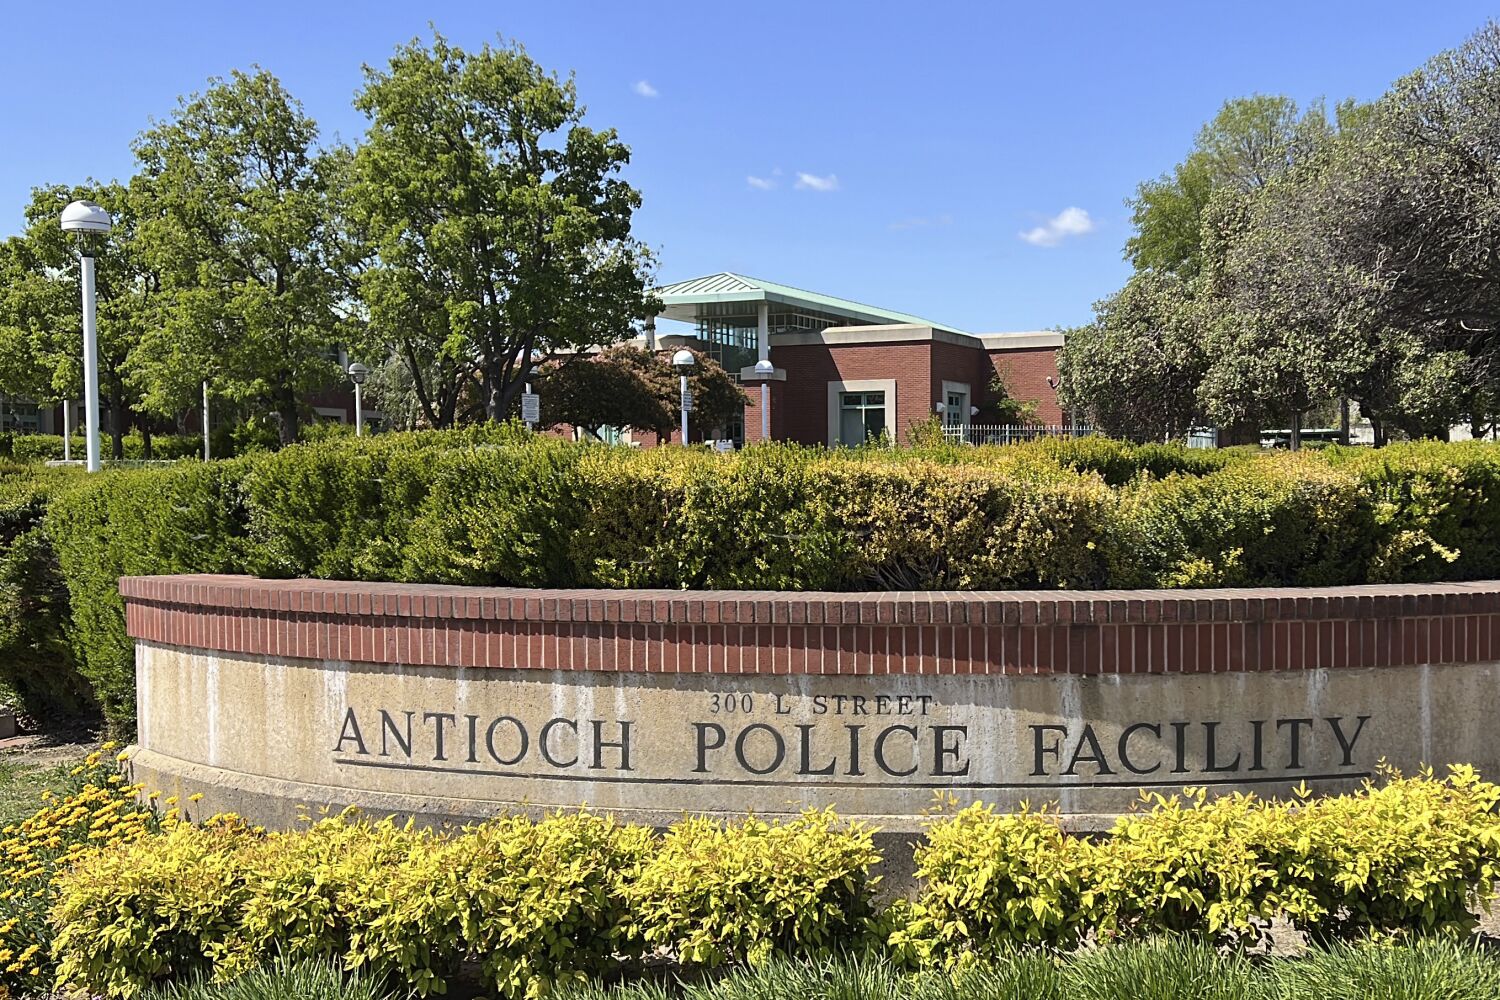 Mutilation Case Over Antioch Police Racist Text Thrown